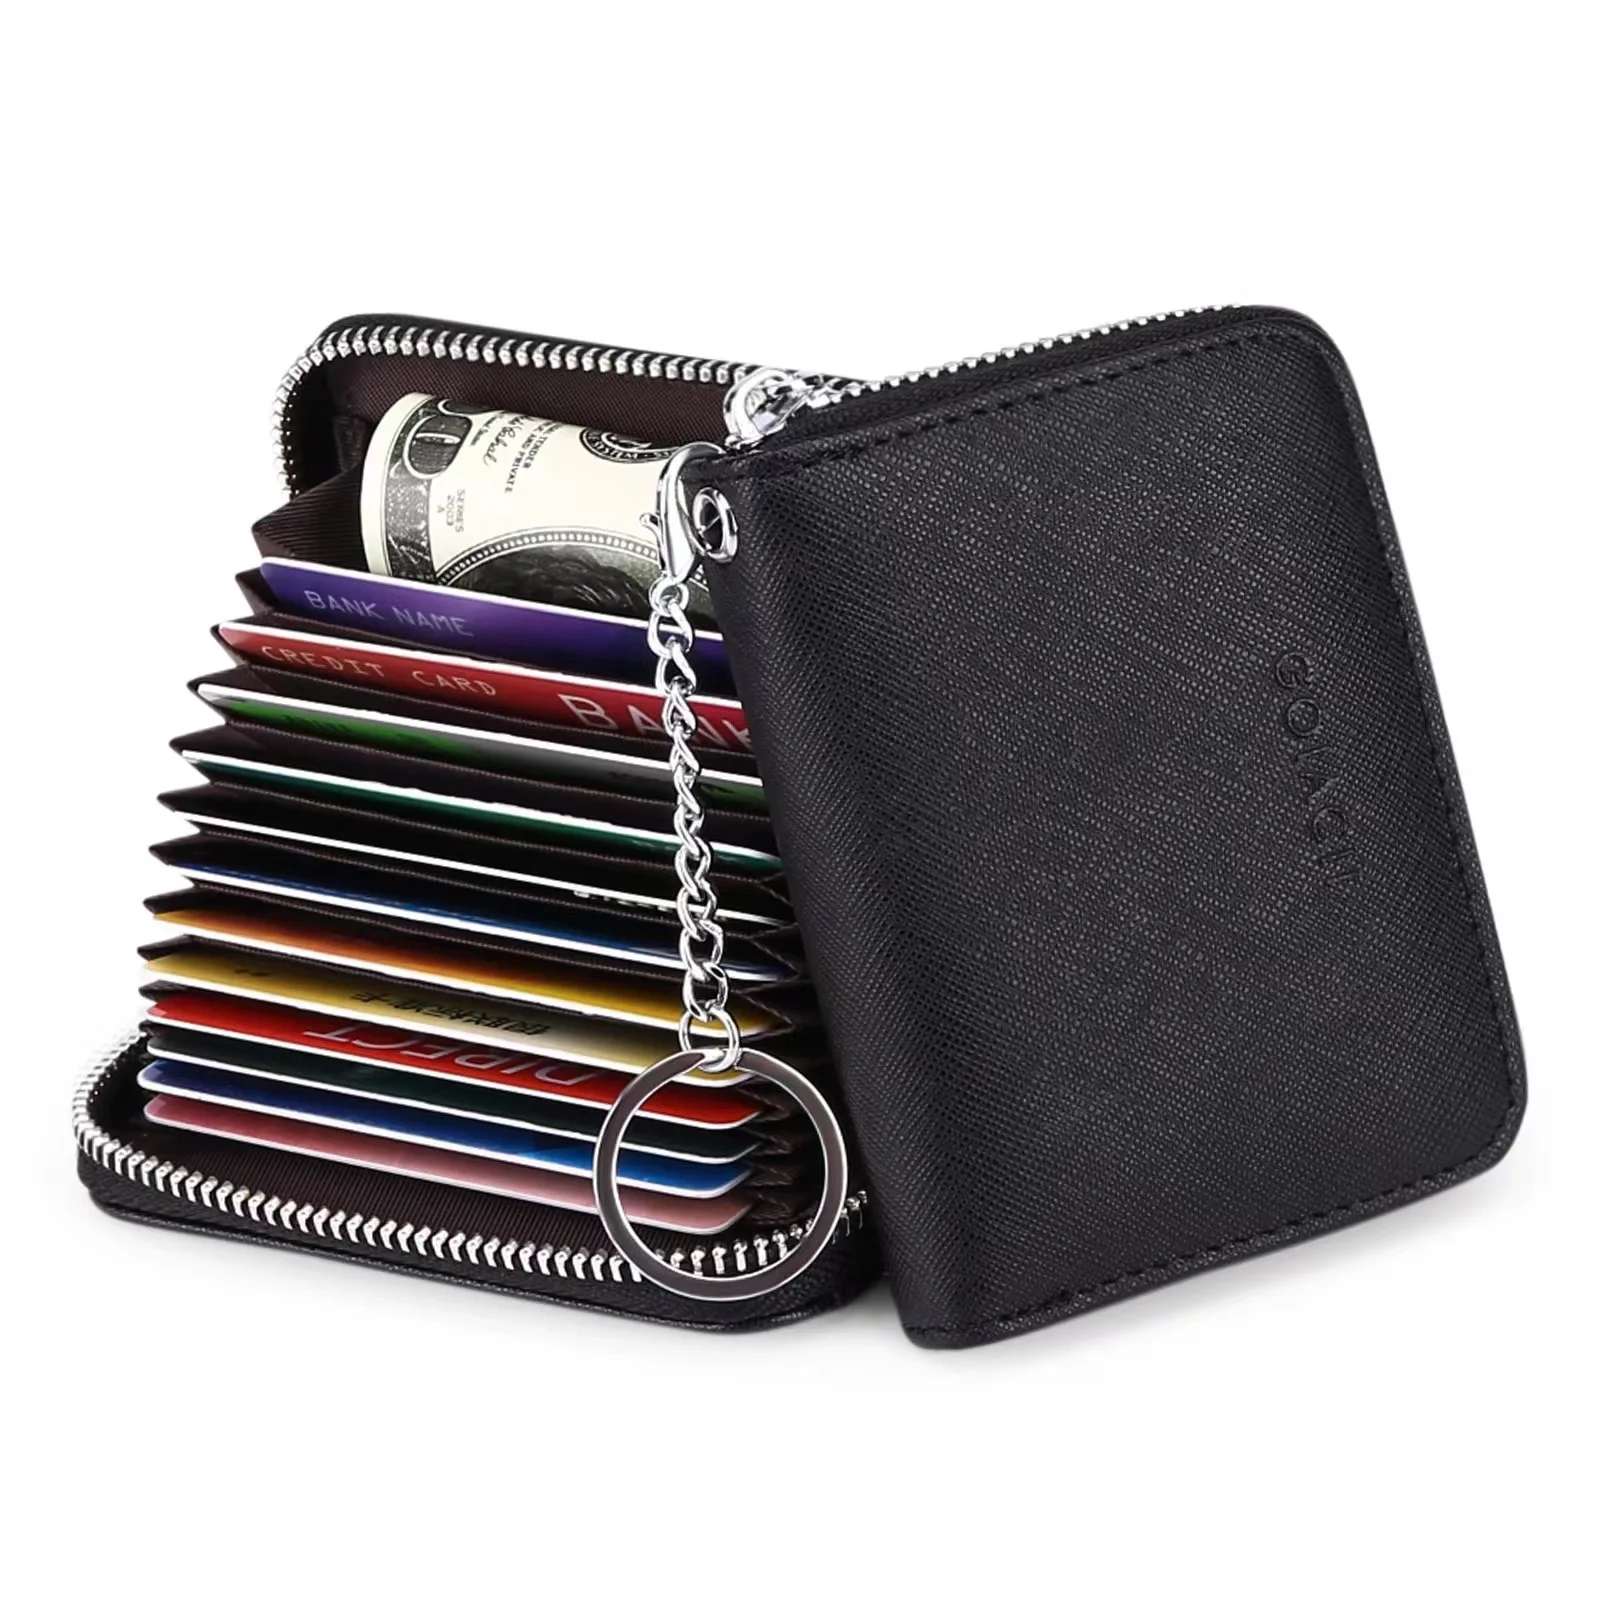 The First Layer Cowhide Multi Card High-Capacity Men's And Women's Purses RFID Anti-Theft Brushes Are Available For Wholesale